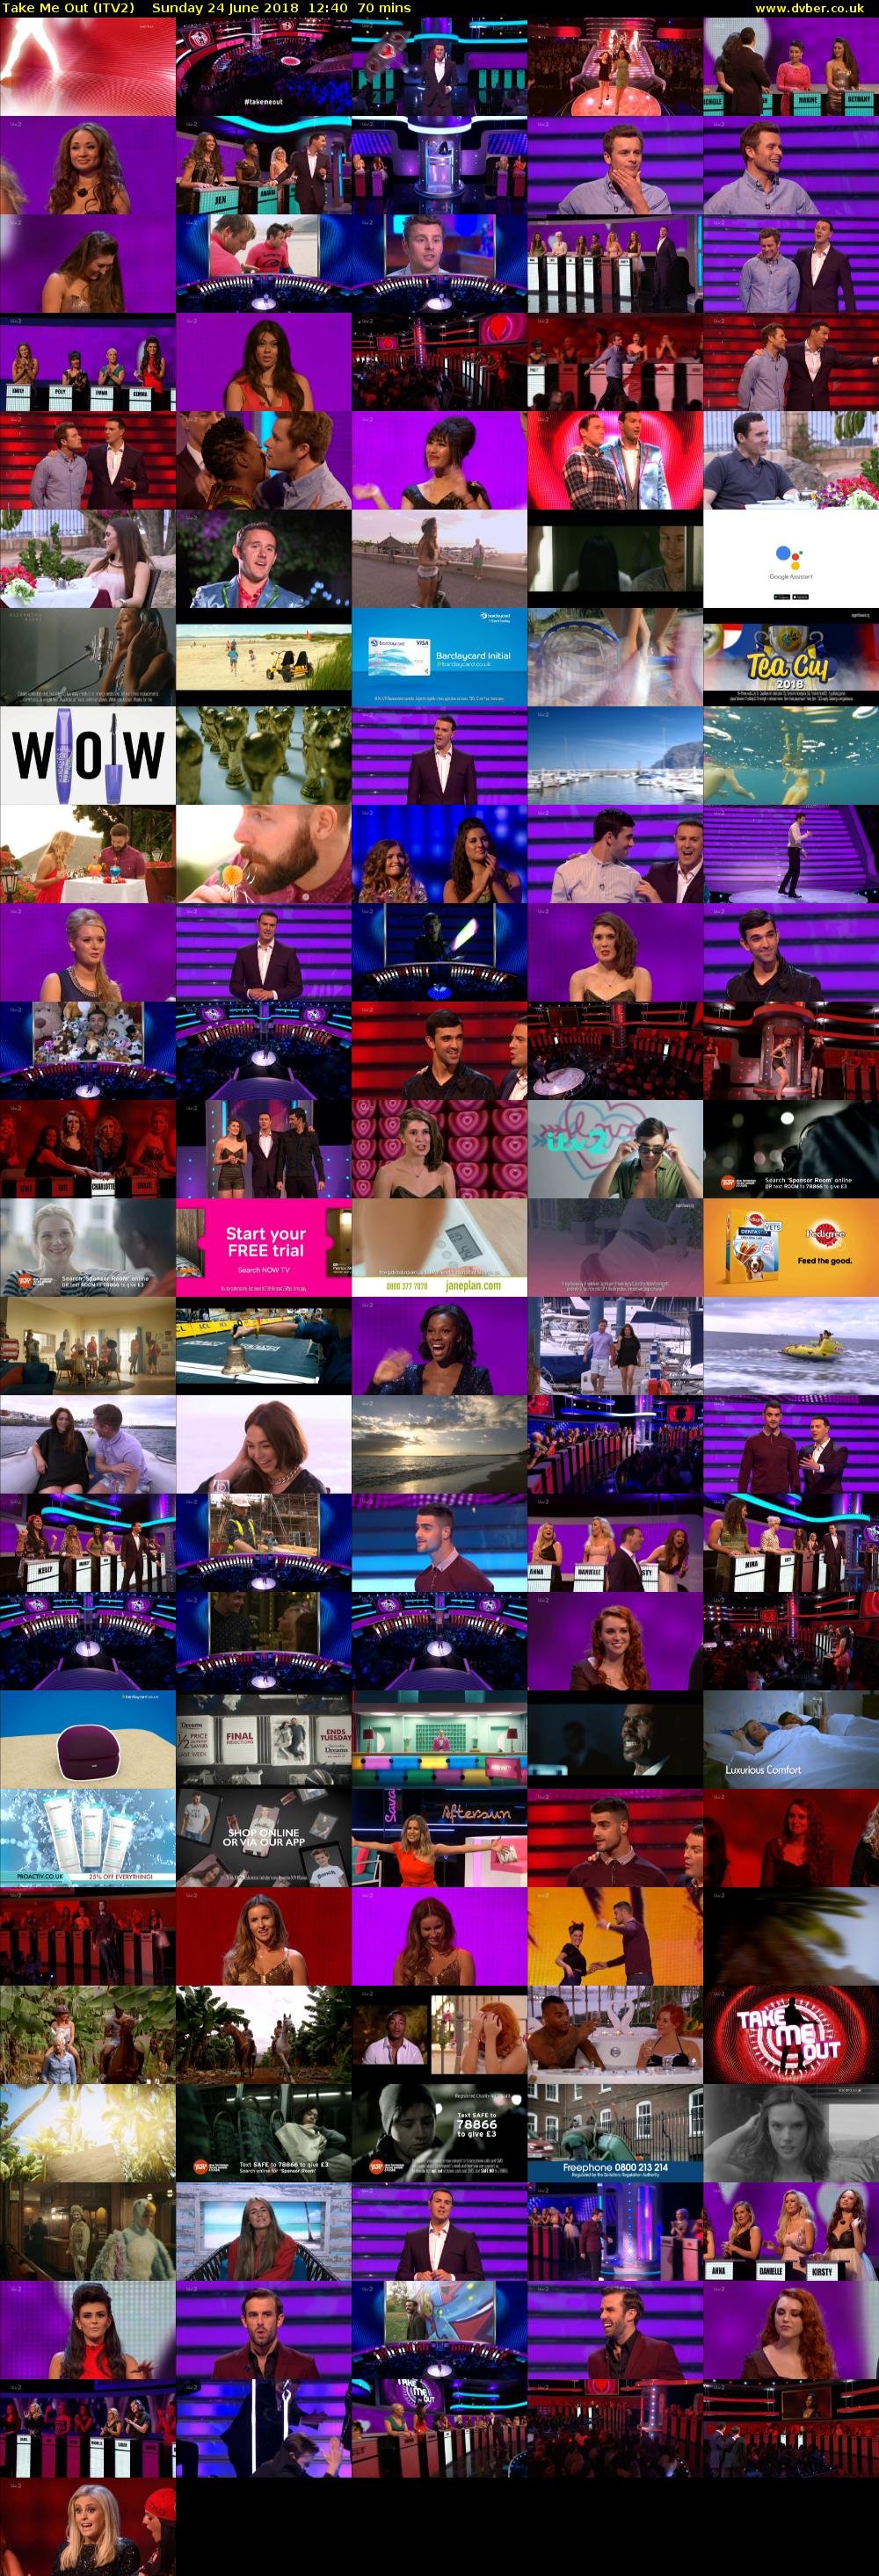 Take Me Out (ITV2) Sunday 24 June 2018 12:40 - 13:50